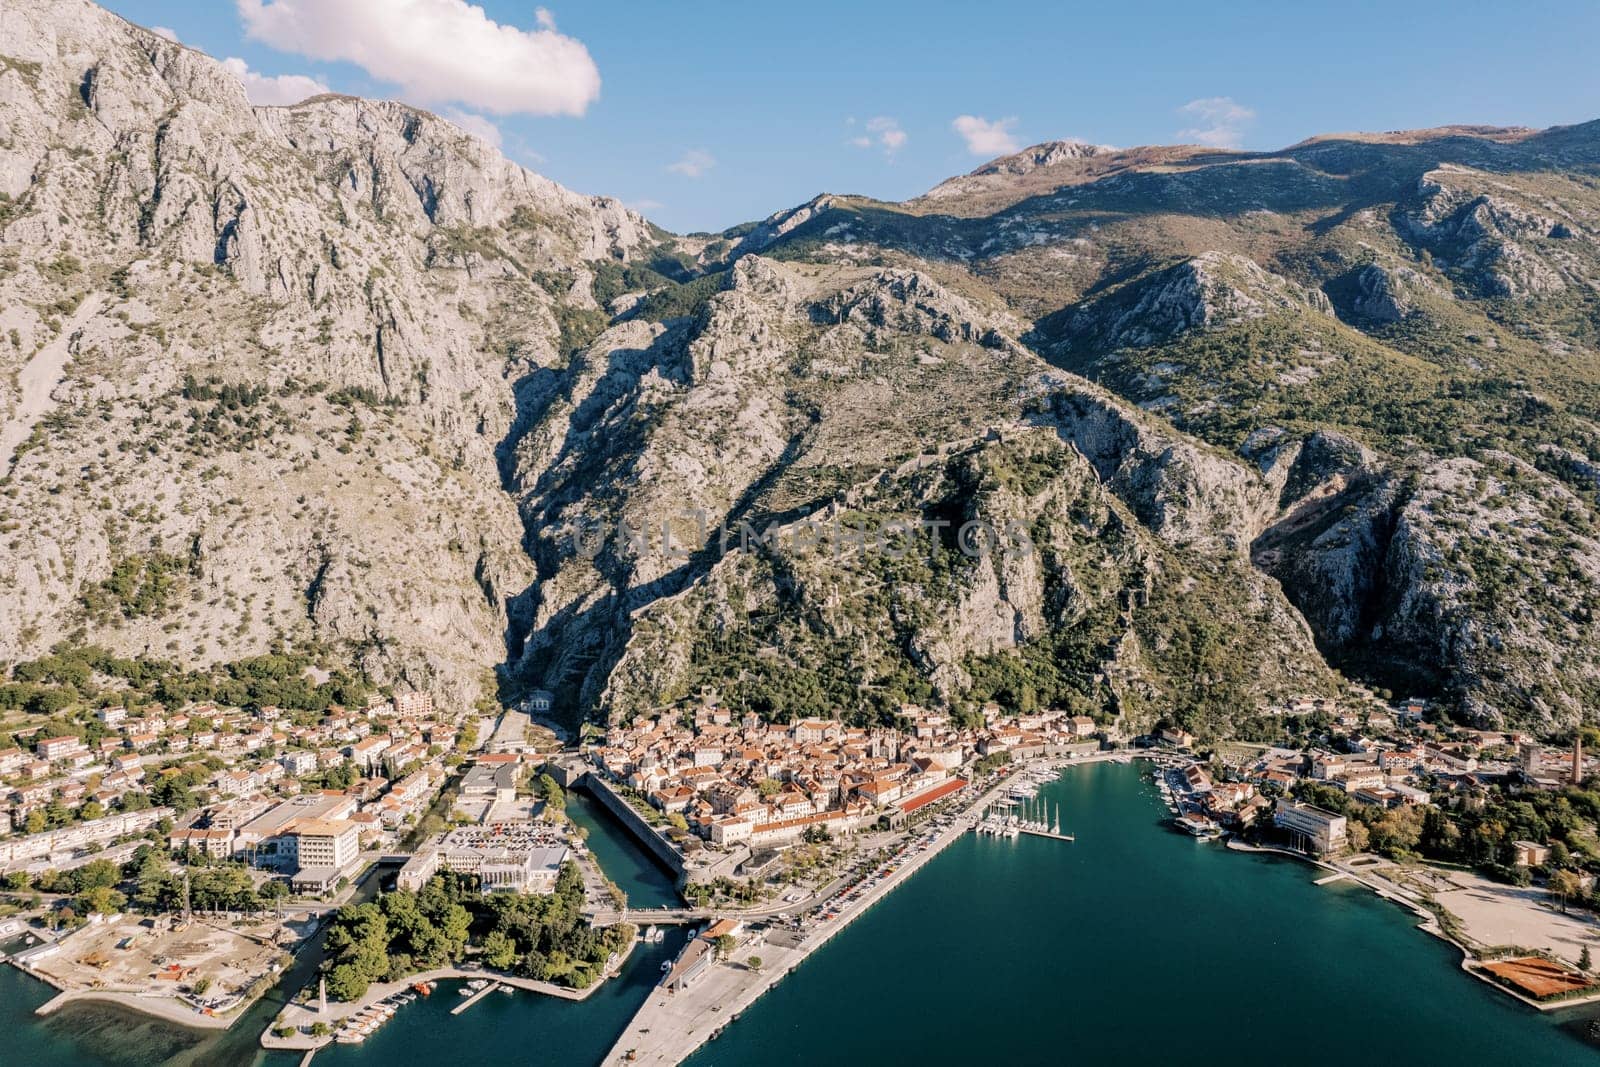 Old town of Kotor with narrow canals at the foot of the mountains on the seashore. Montenegro. Drone. High quality photo